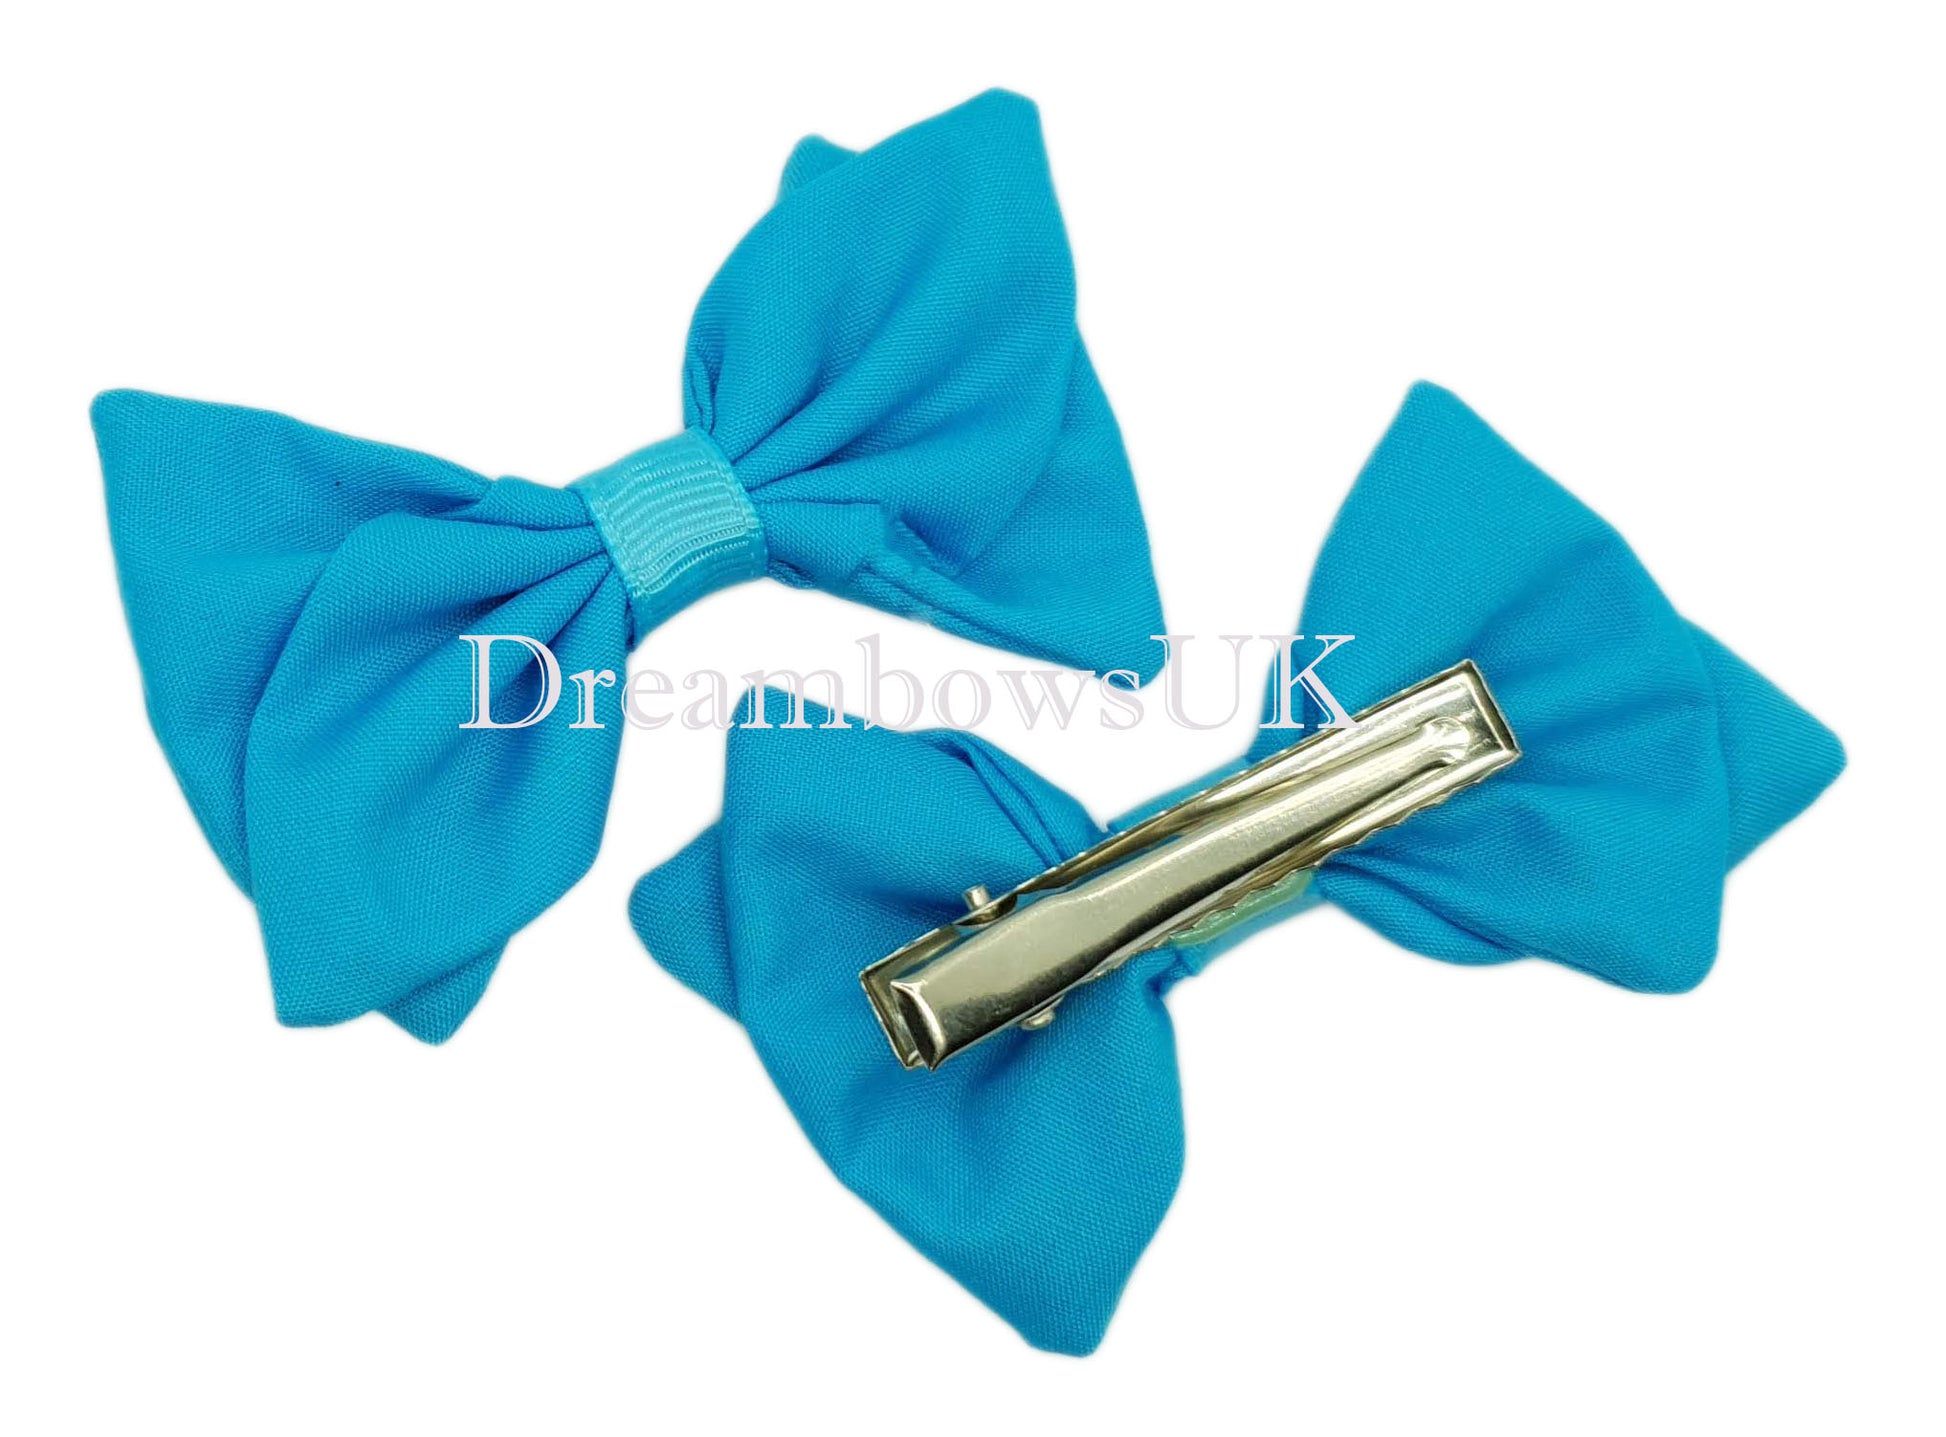 Girls turquoise fabric hair bows on alligator clips